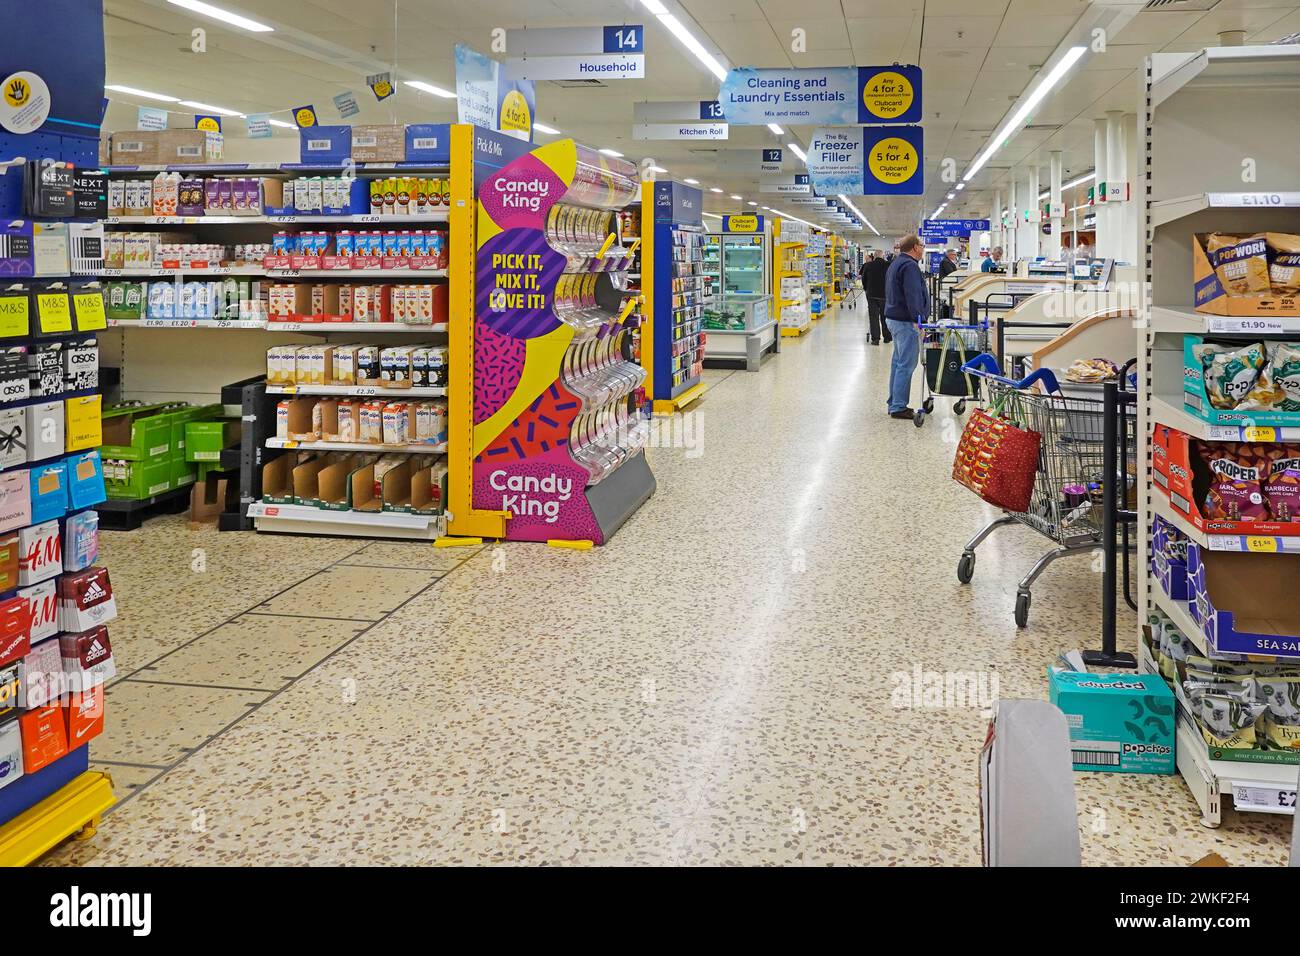 Supermarket shopping aisle interior view of shoppers amongst shelves displaying grocery merchandise in retail business terrazzo floor Essex England UK Stock Photo